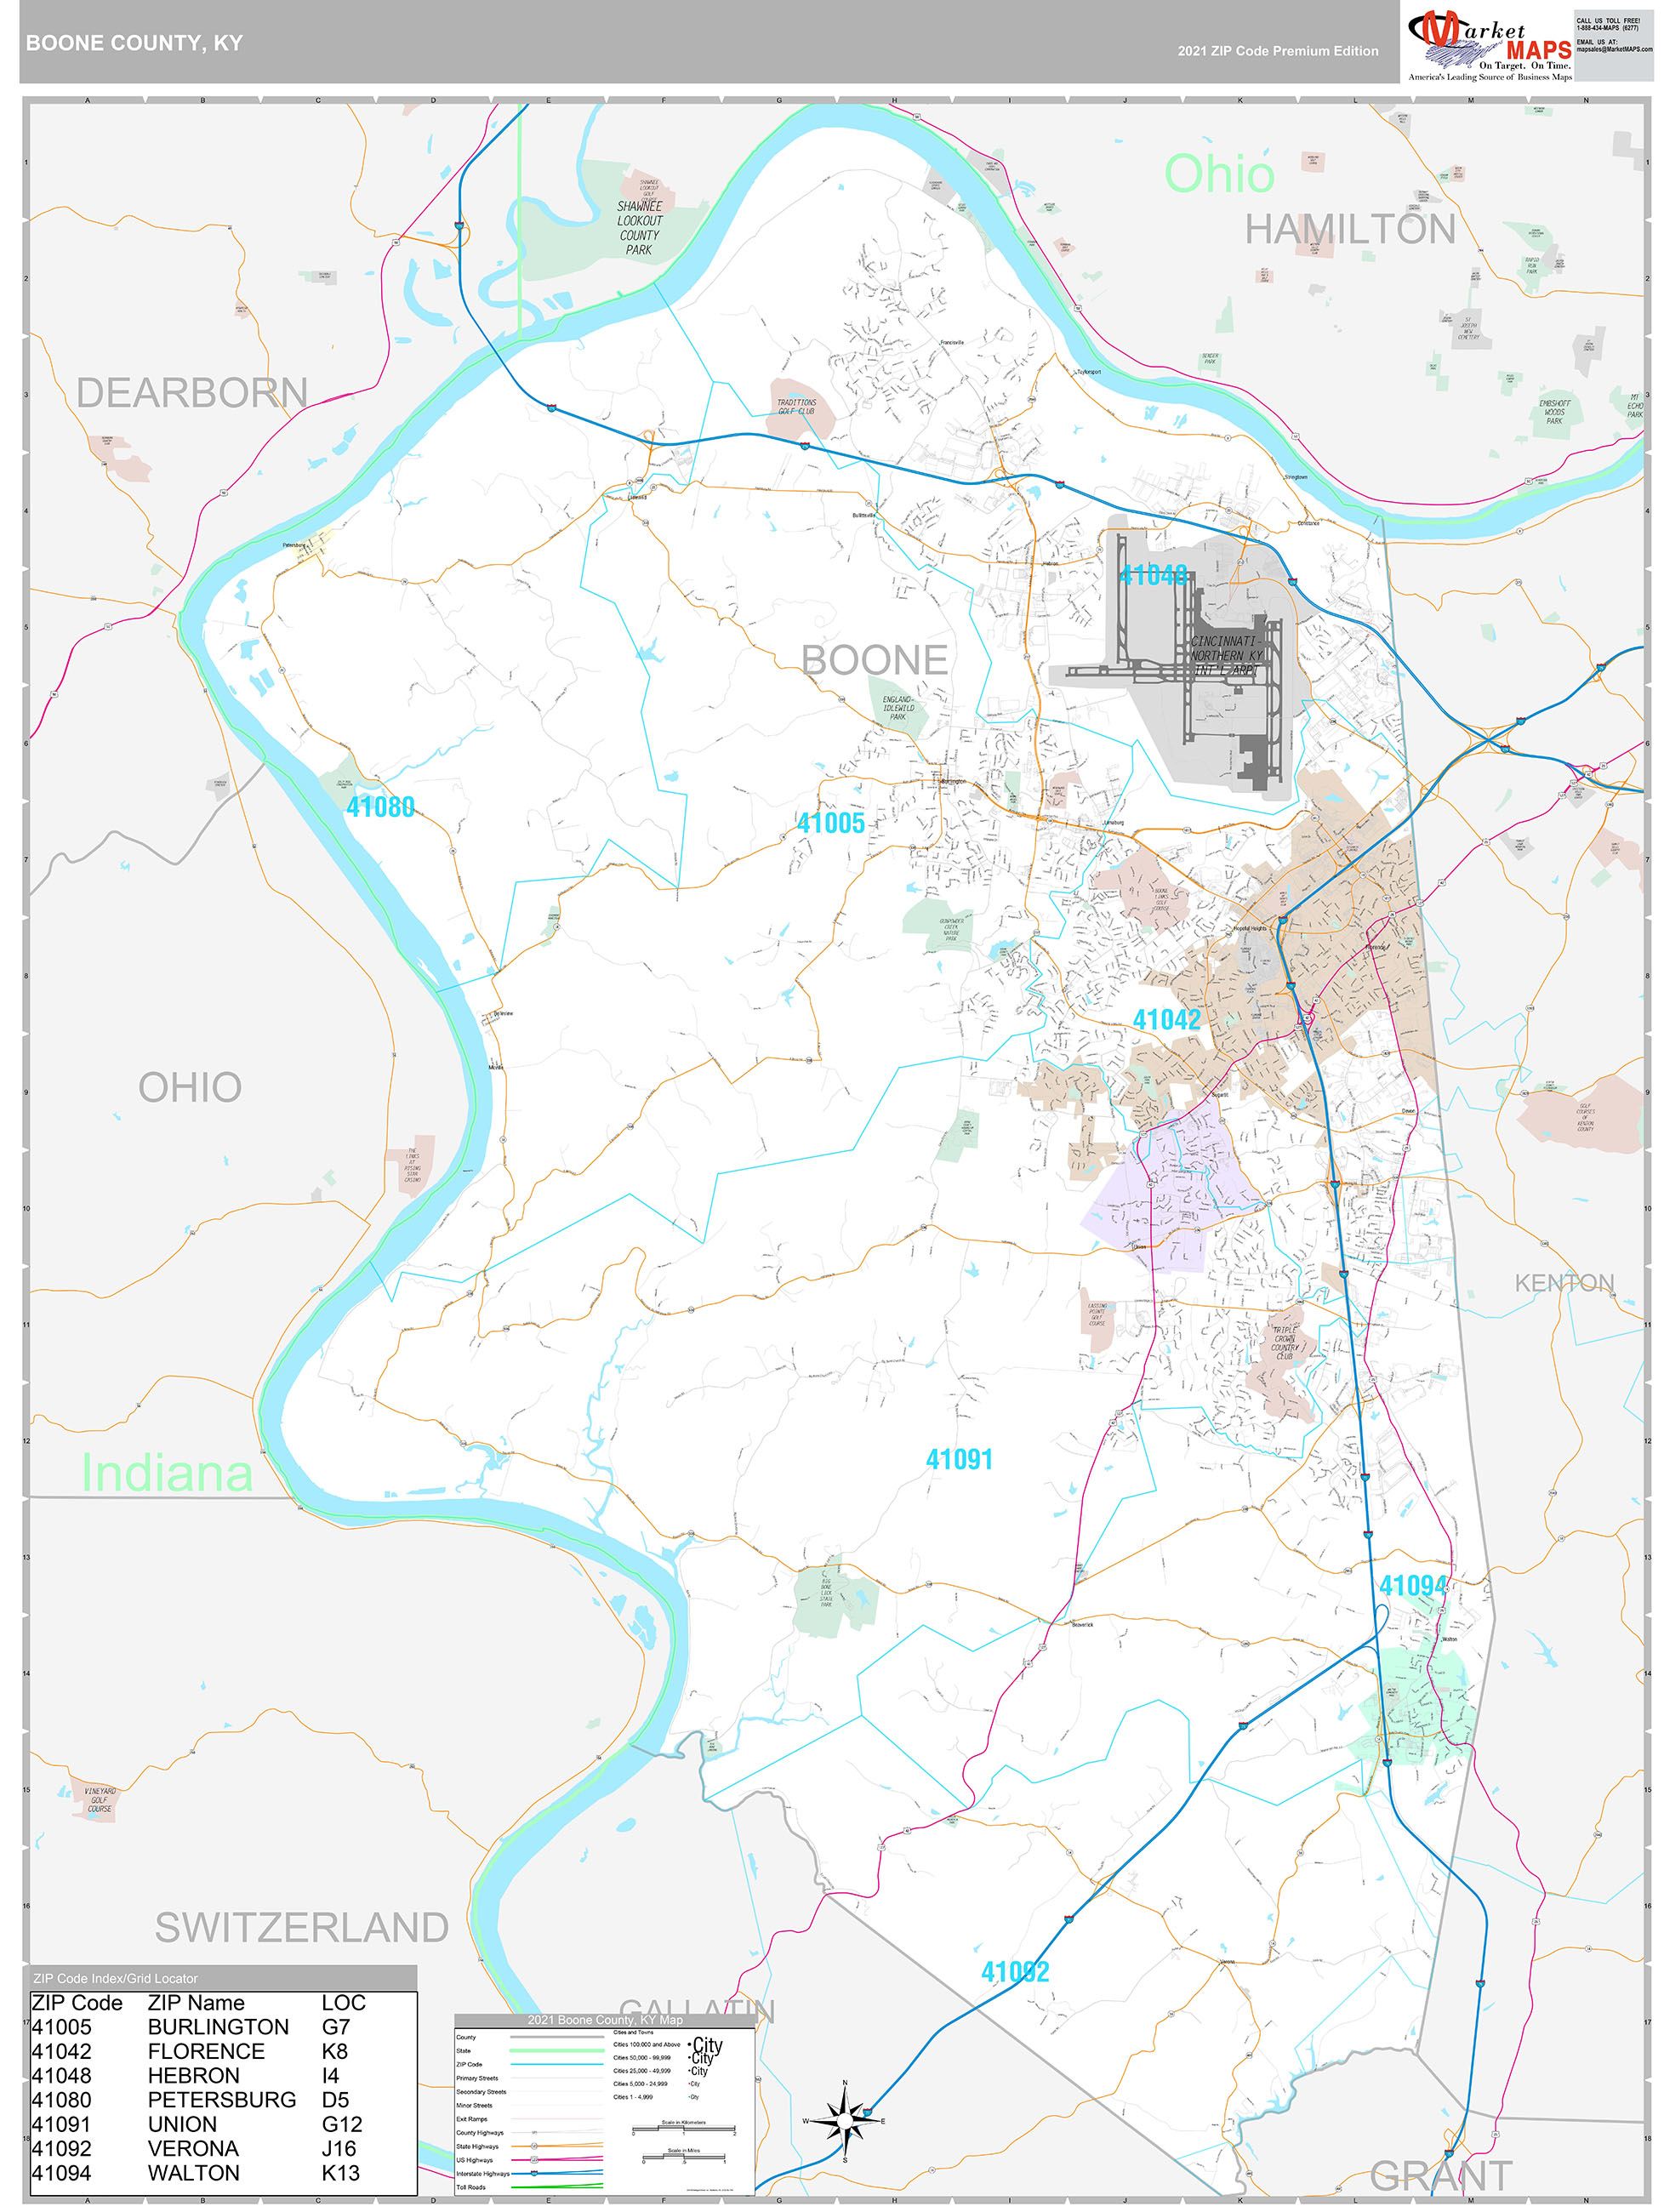 Boone County, KY Wall Map Premium Style by MarketMAPS MapSales